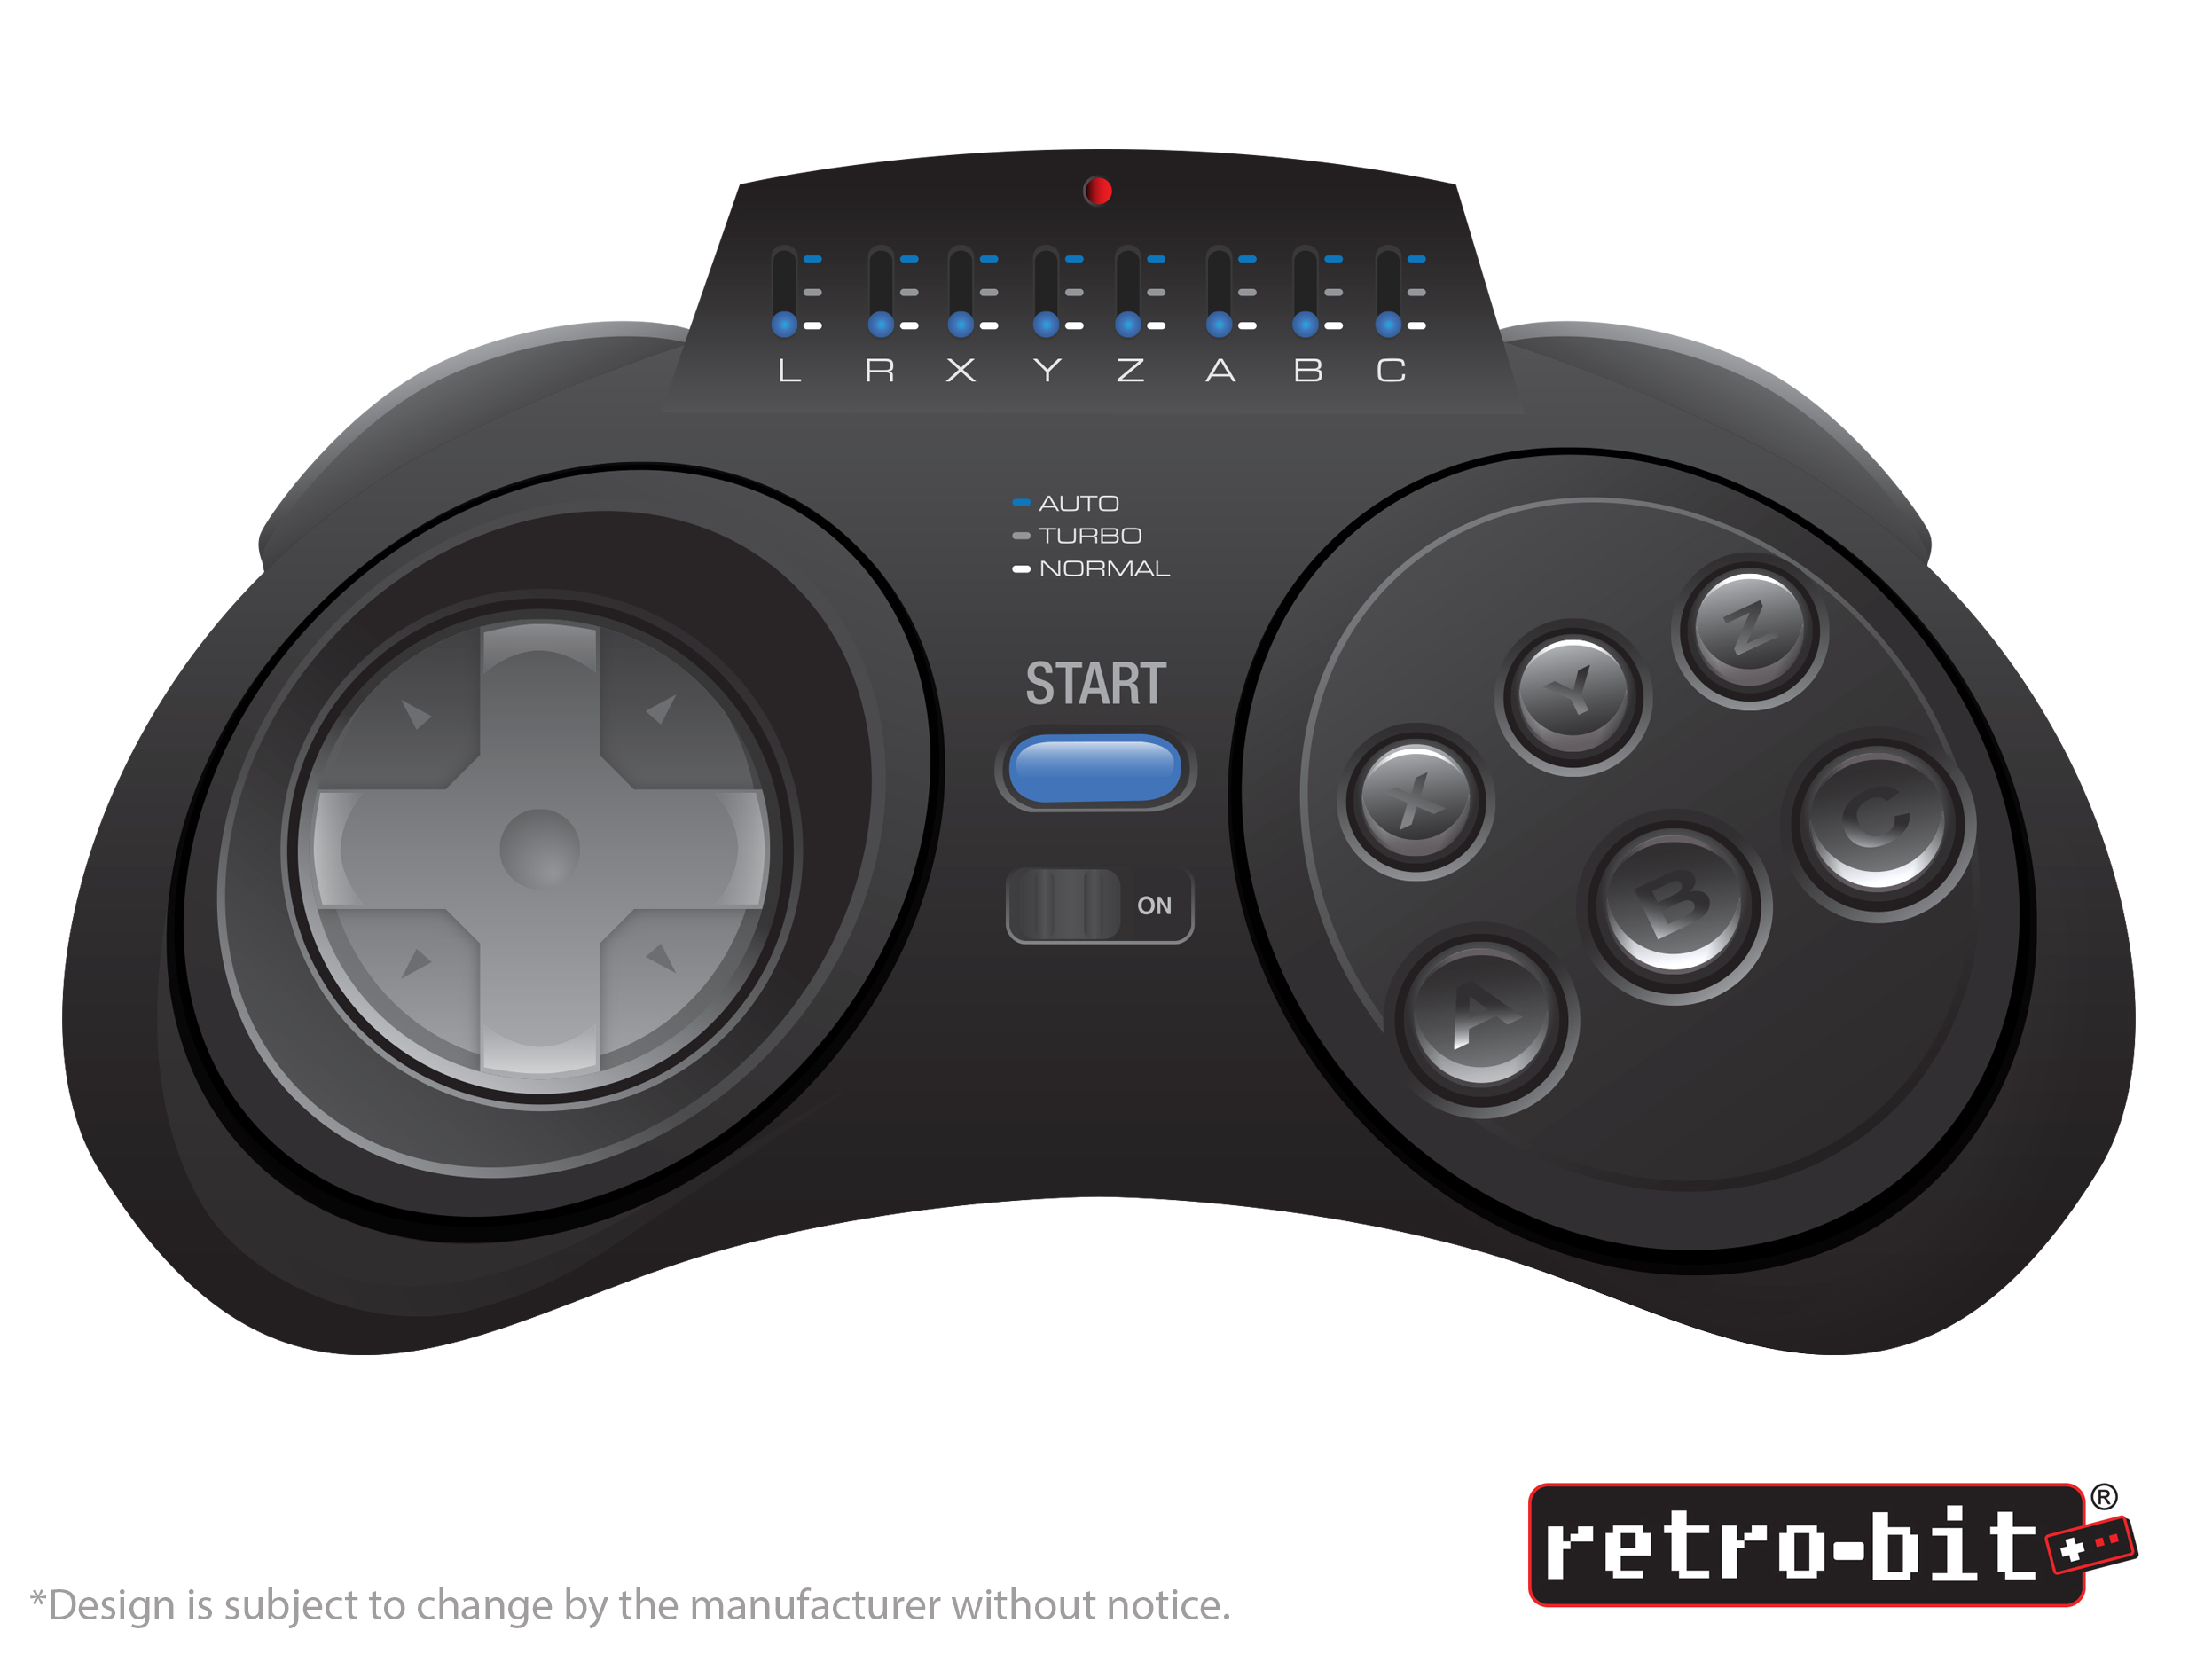 Retro-Bit's wireless classic controllers are pretty awesome | Brutal Gamer